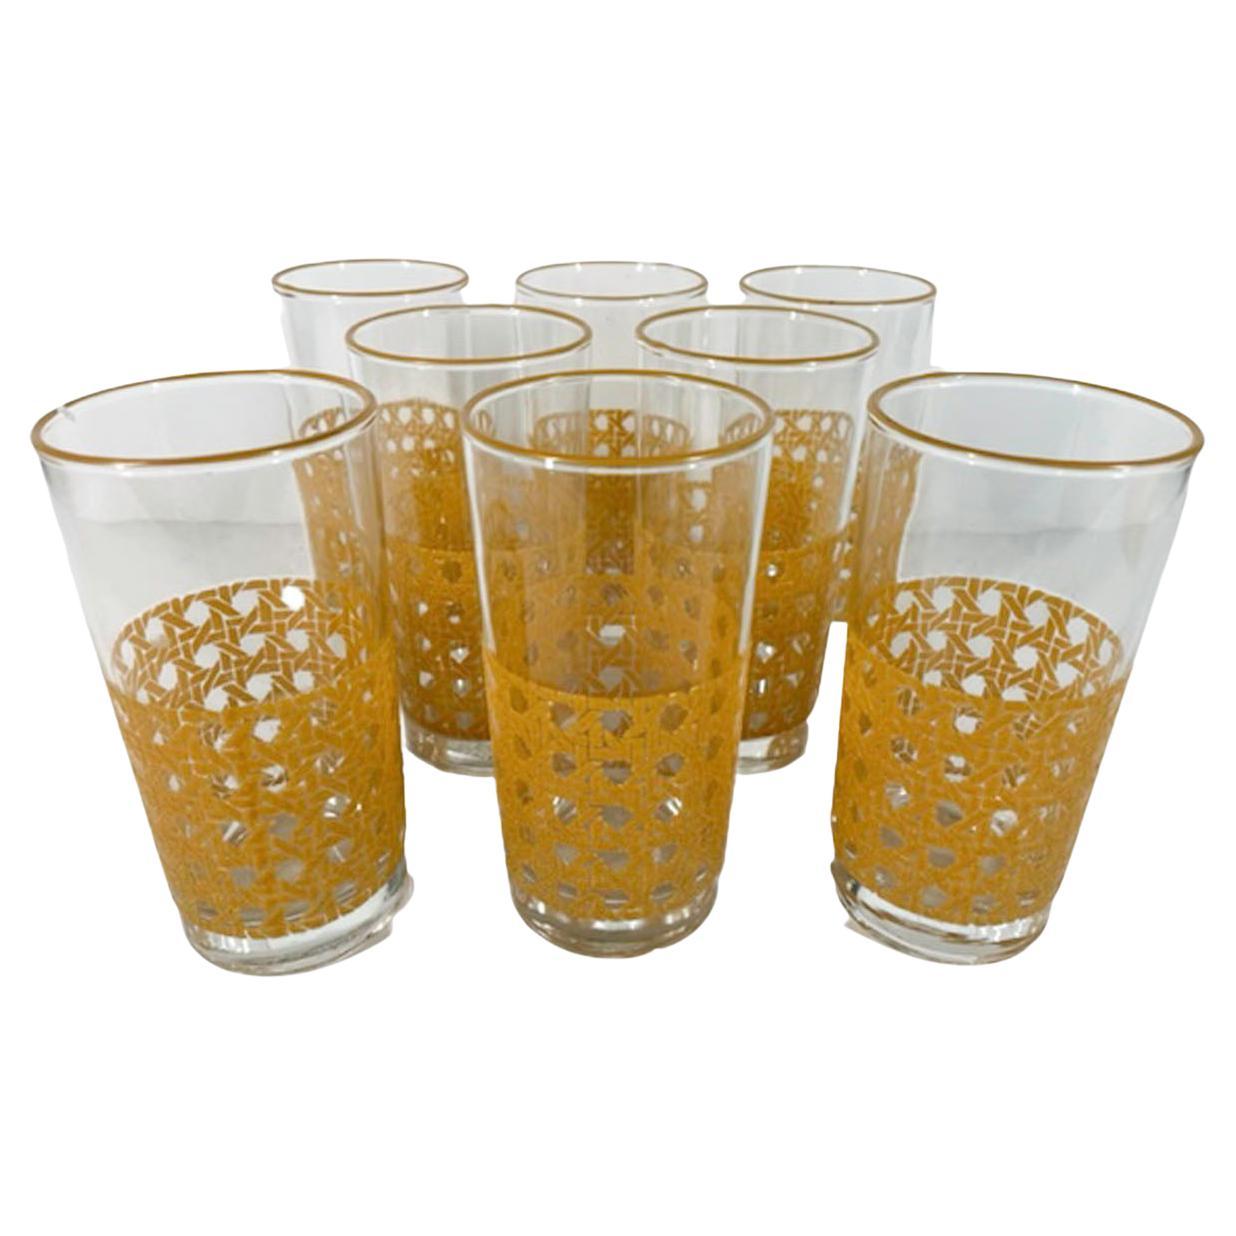 Vintage Libbey Glass Co., Cane Pattern, Highball Glasses